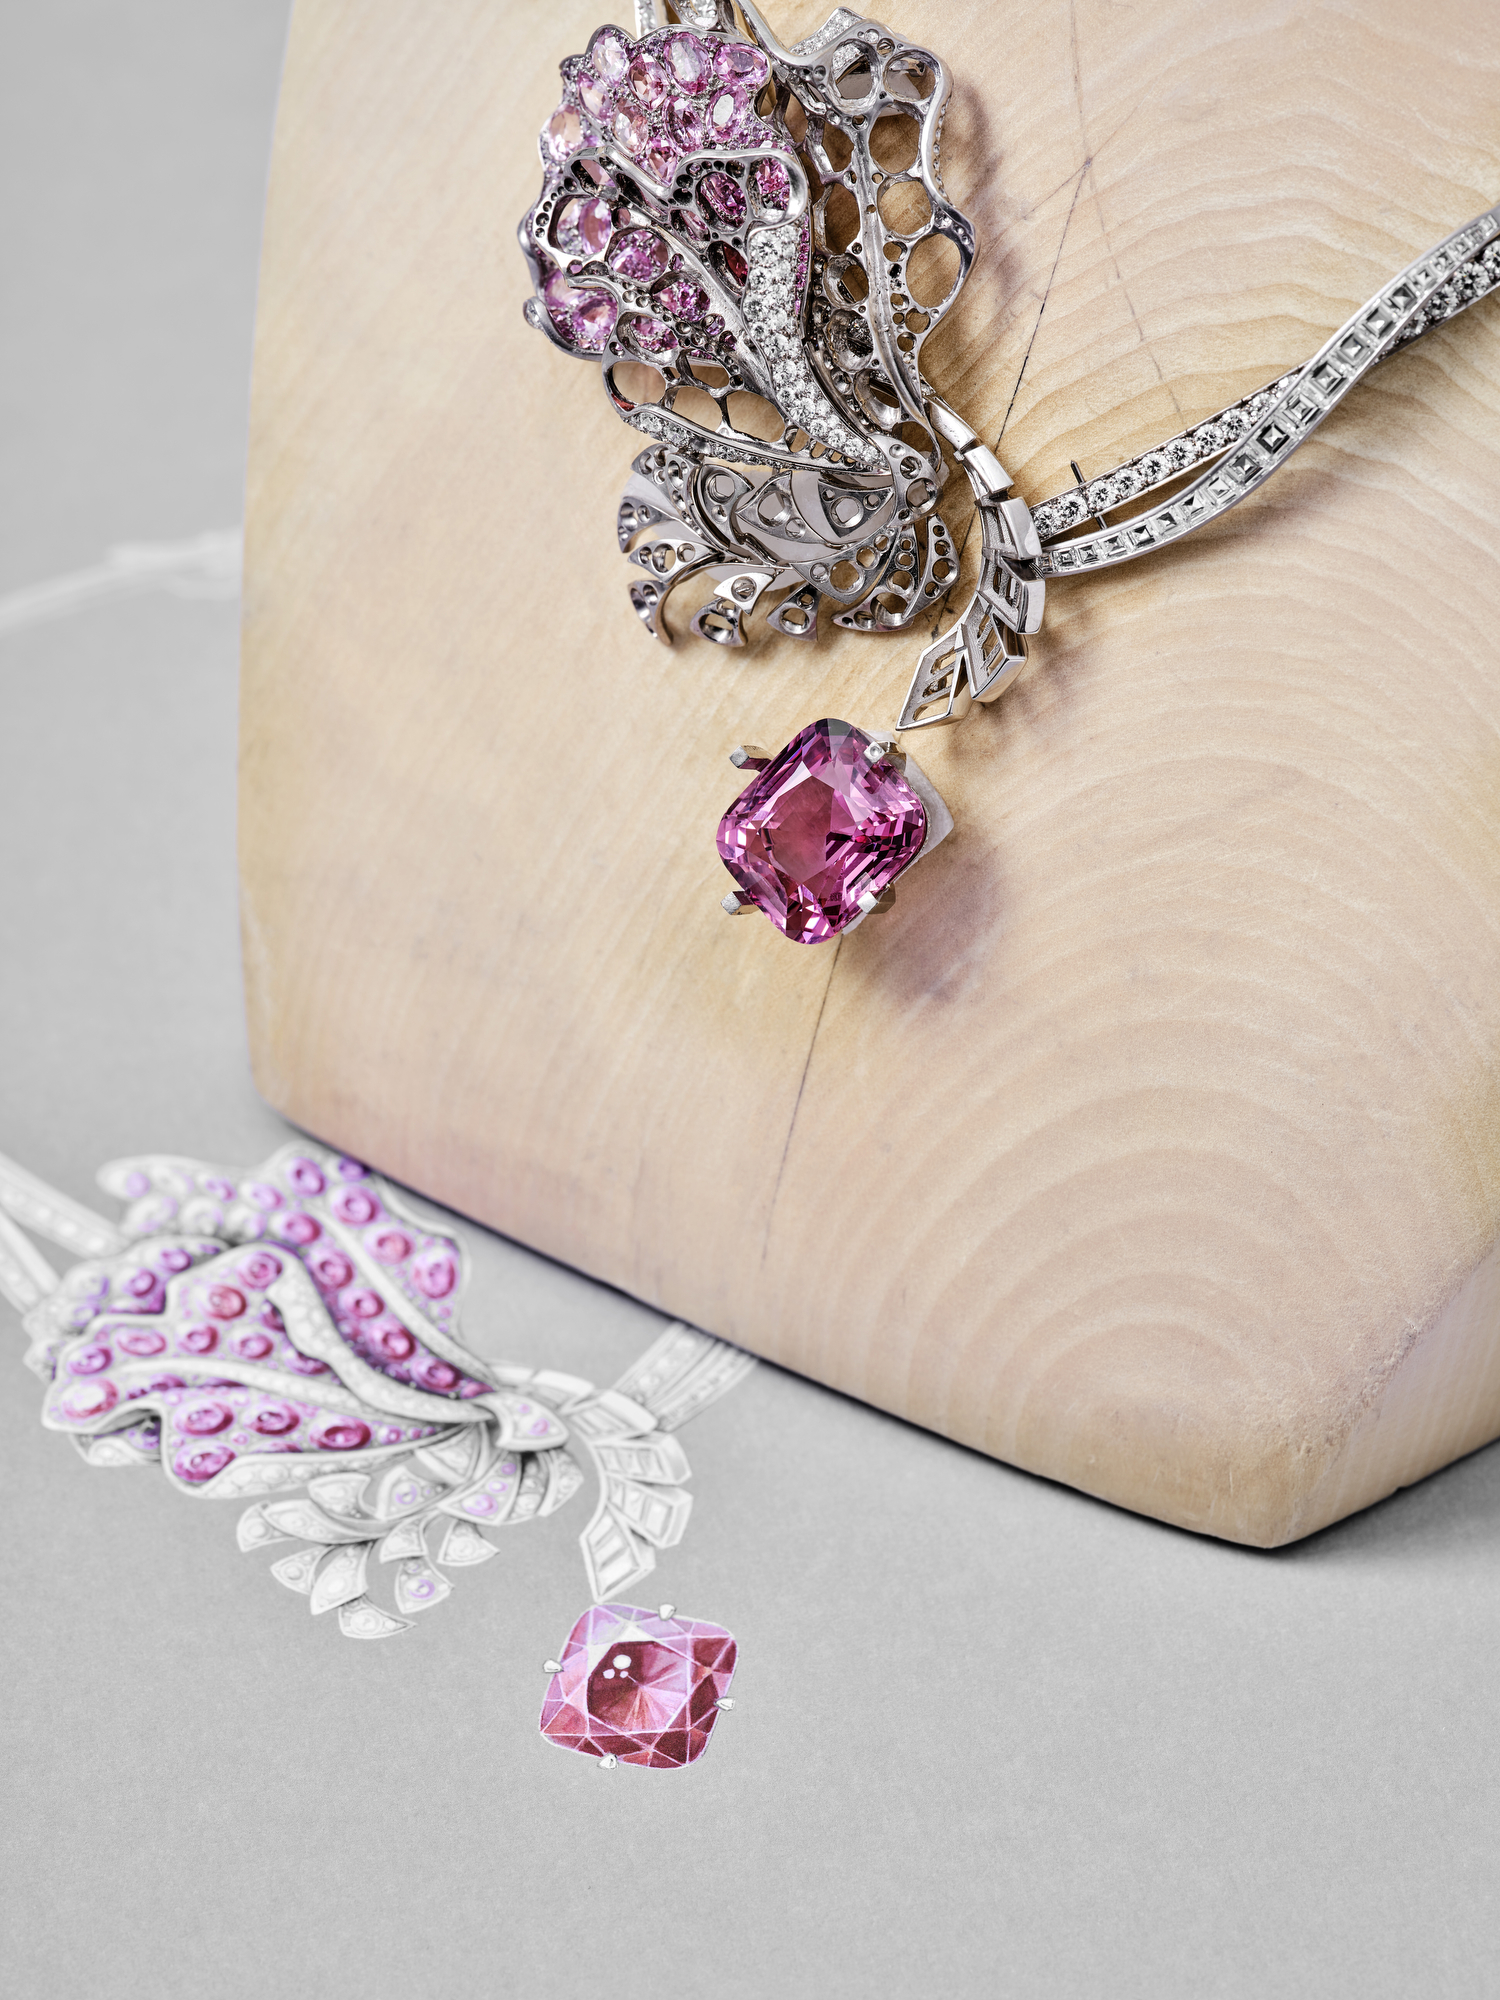 Chaumet reaches for the stars with its new high jewellery collection